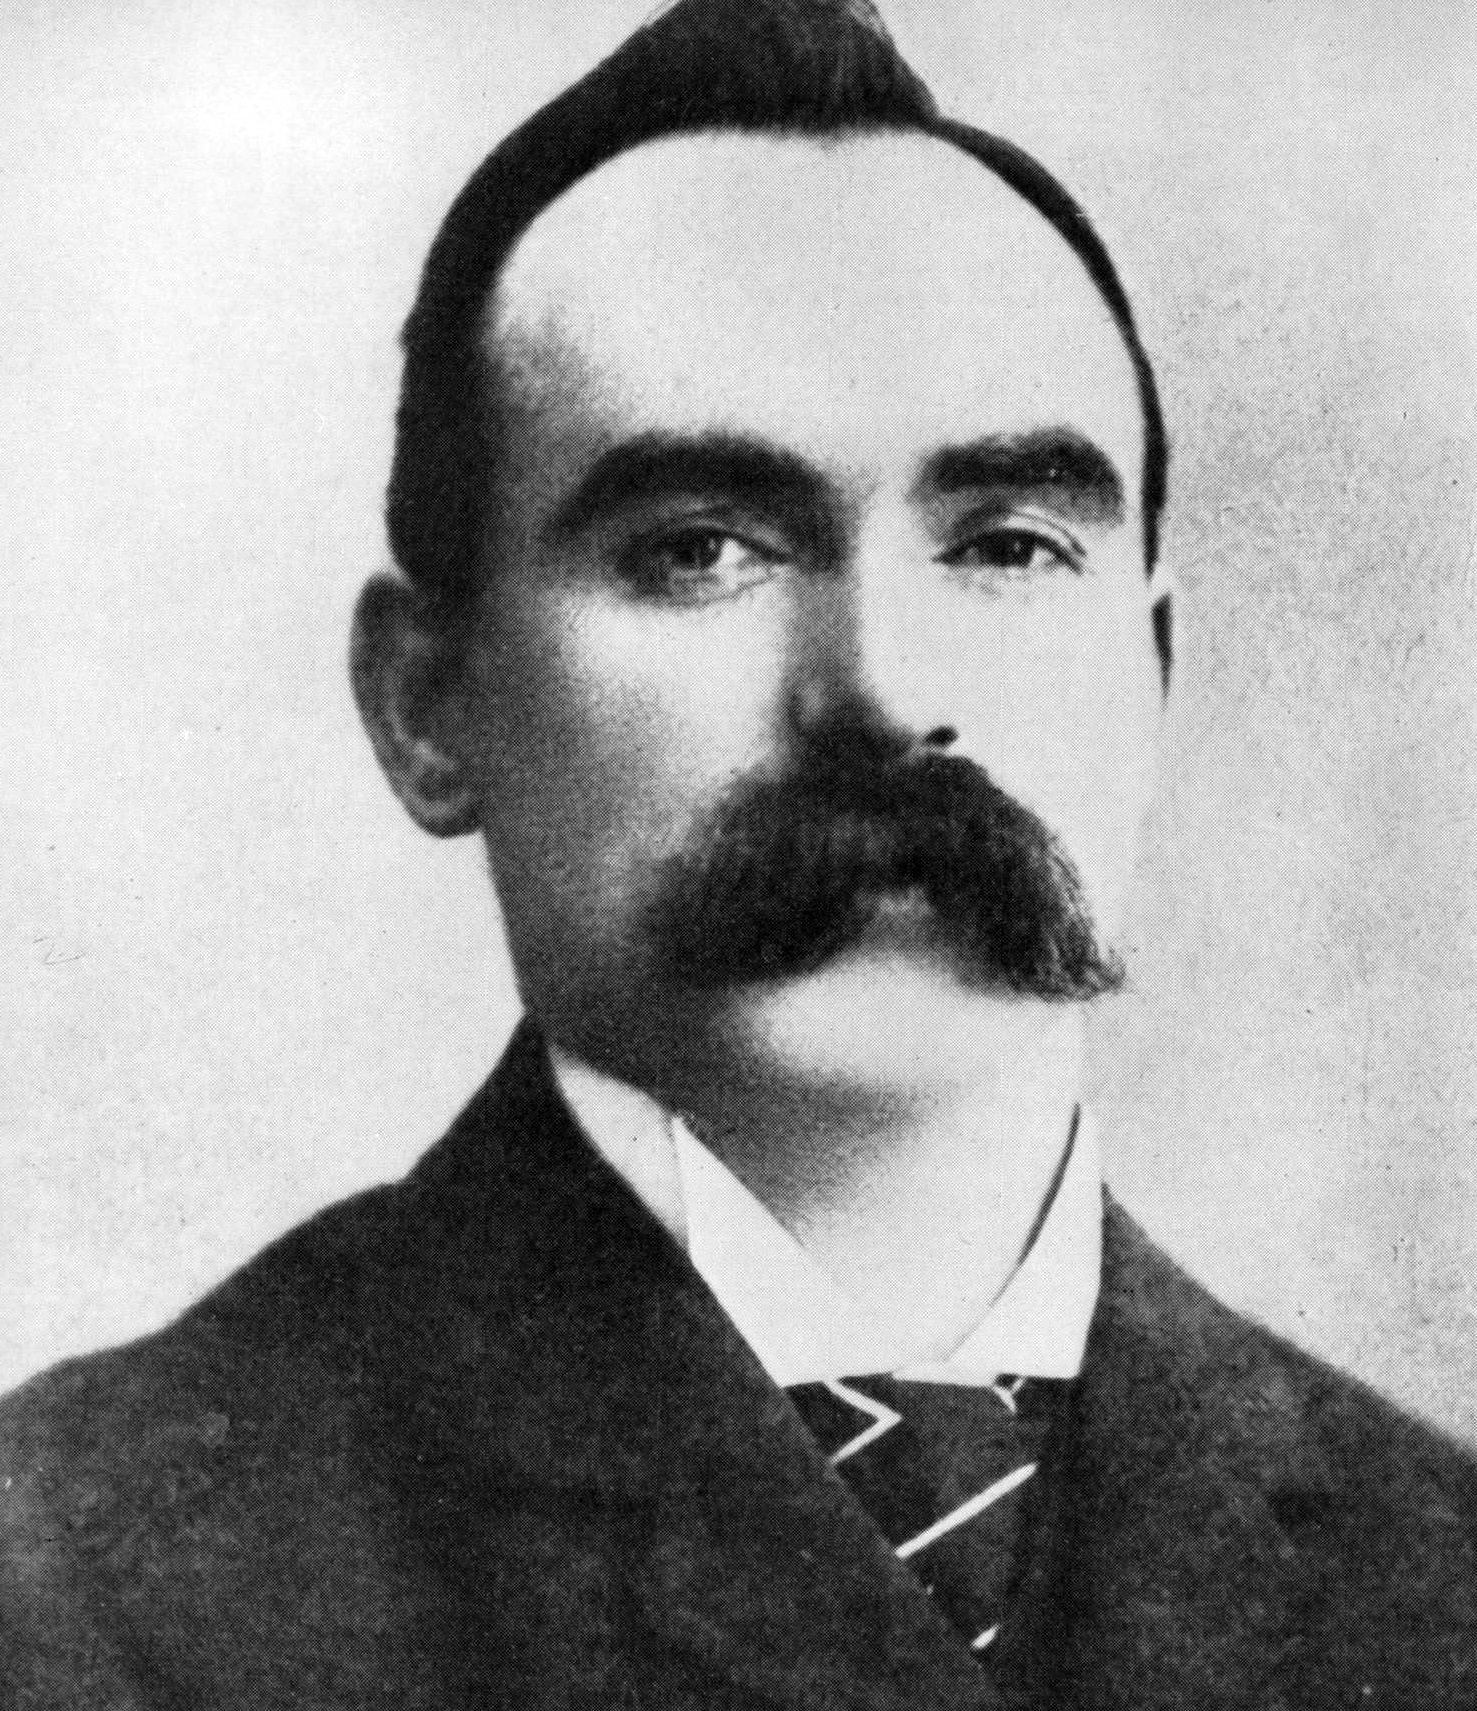 James Connolly Image Flickr The Irish Labour Party